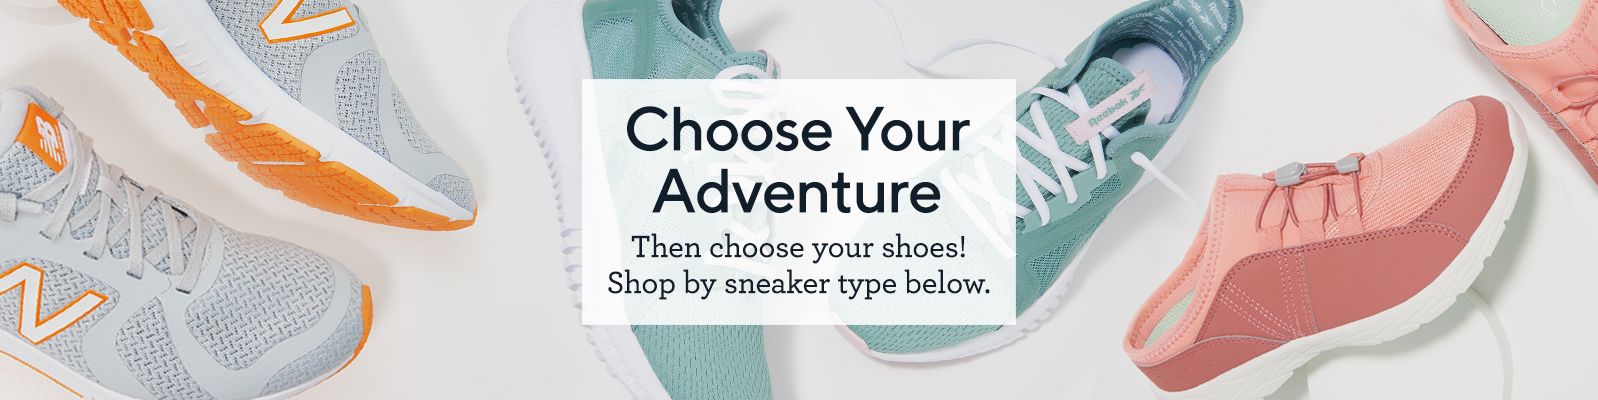 Choose Your Adventure Then choose your shoes! Shop by sneaker type below.